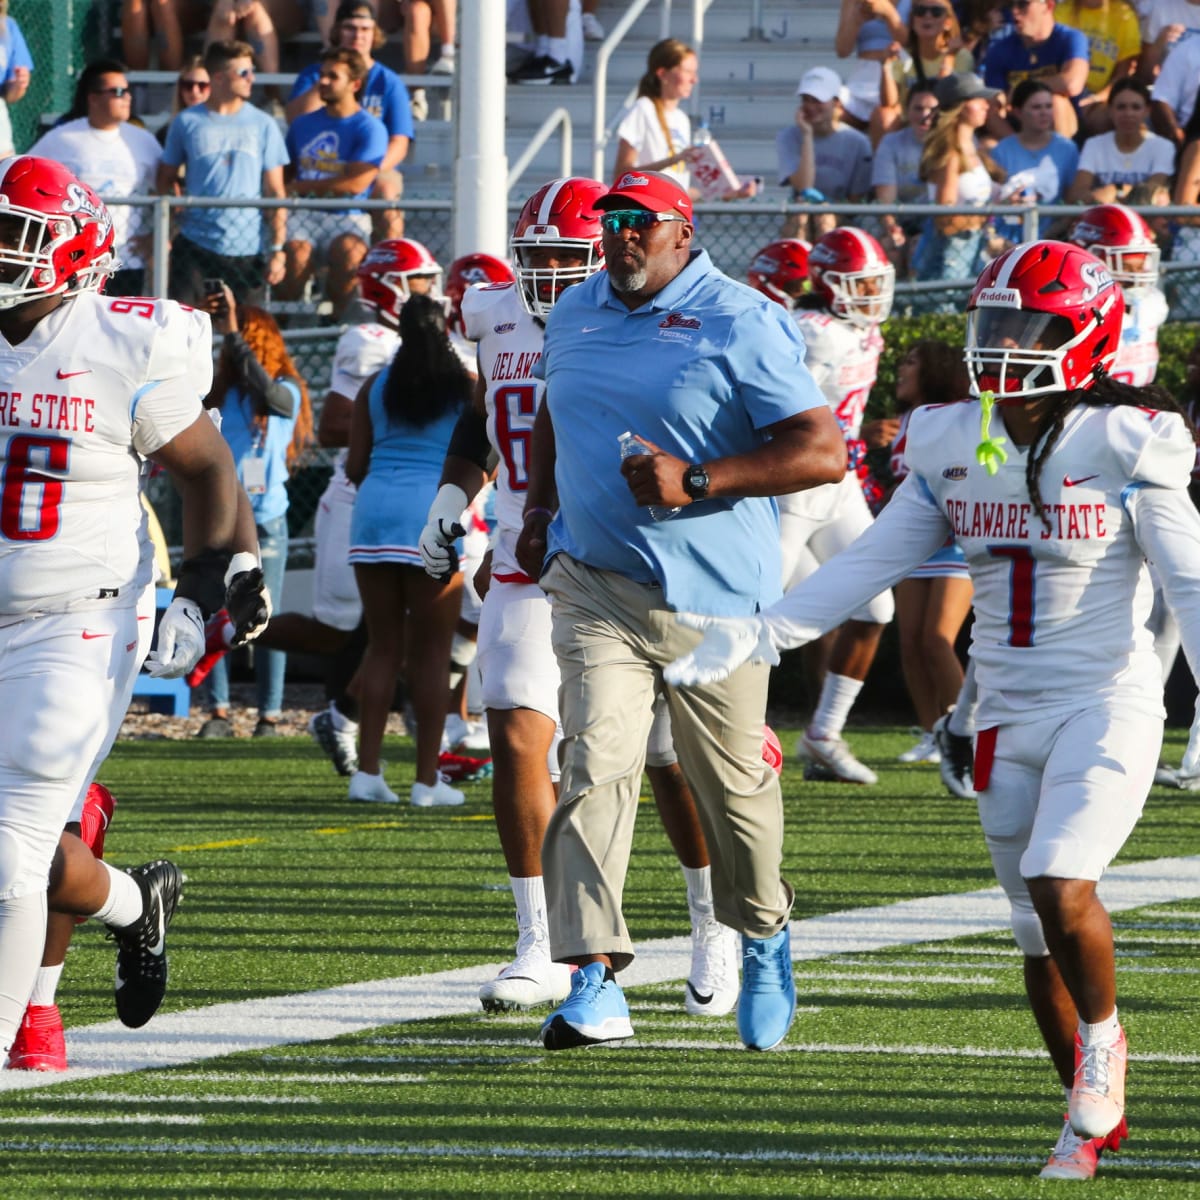 Former Delaware State football players concerned about program's future